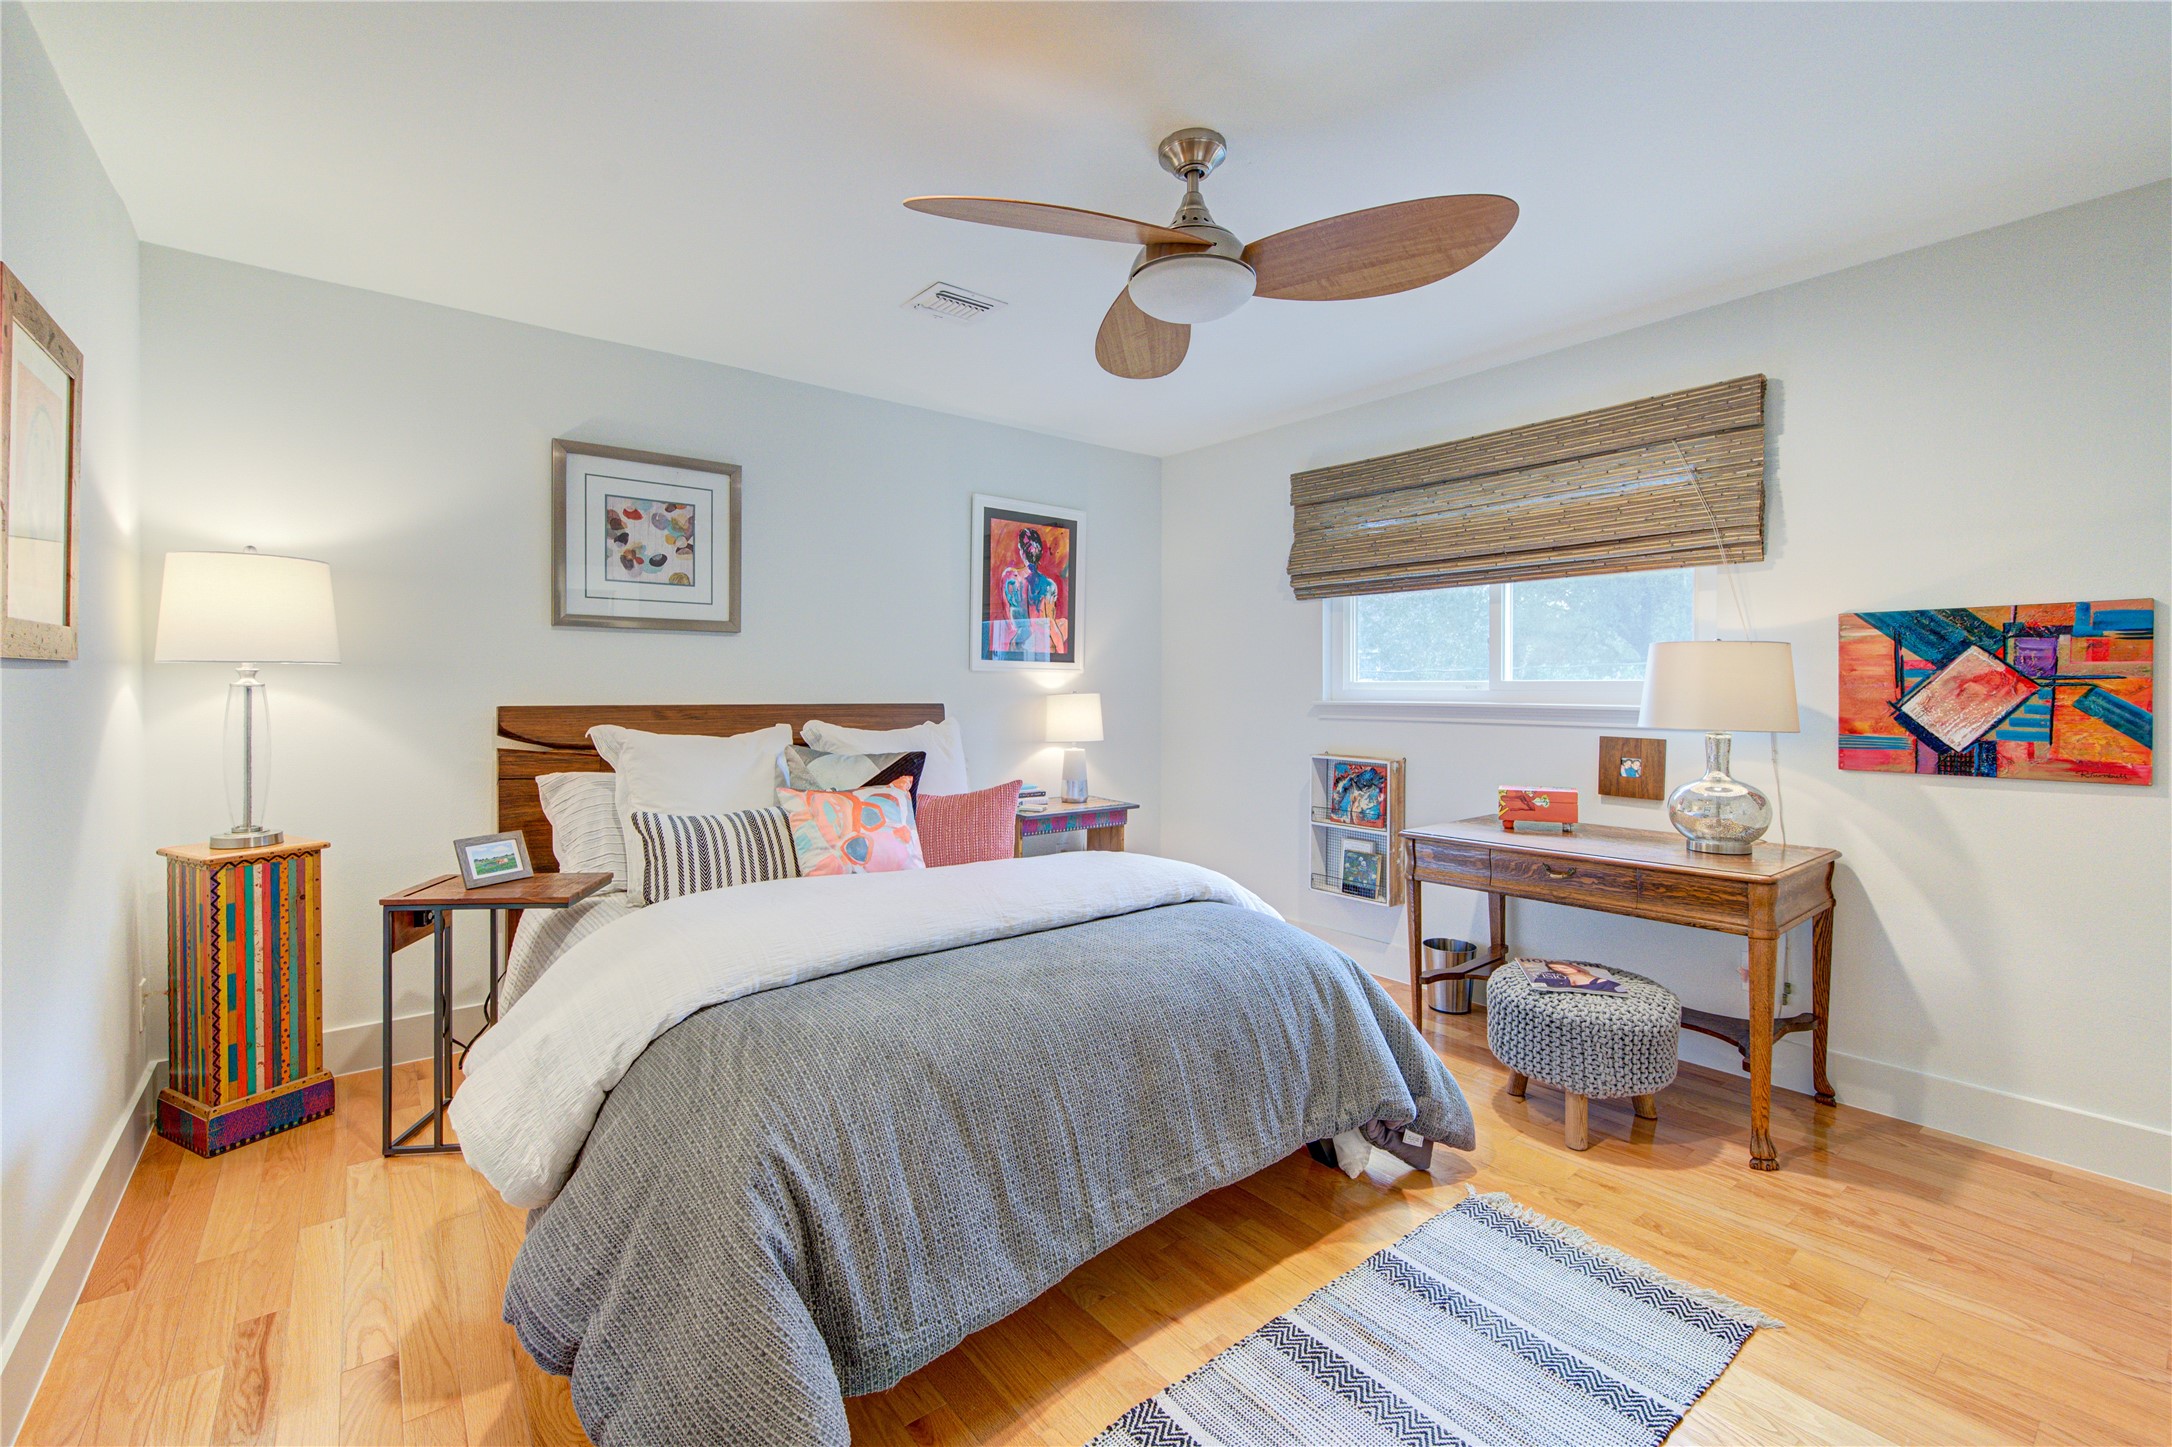 All four upstairs bedrooms boast modern lighting, double pane windows, wood floors, and neutral paint. This home is move in ready so you can move in with peace of mind.